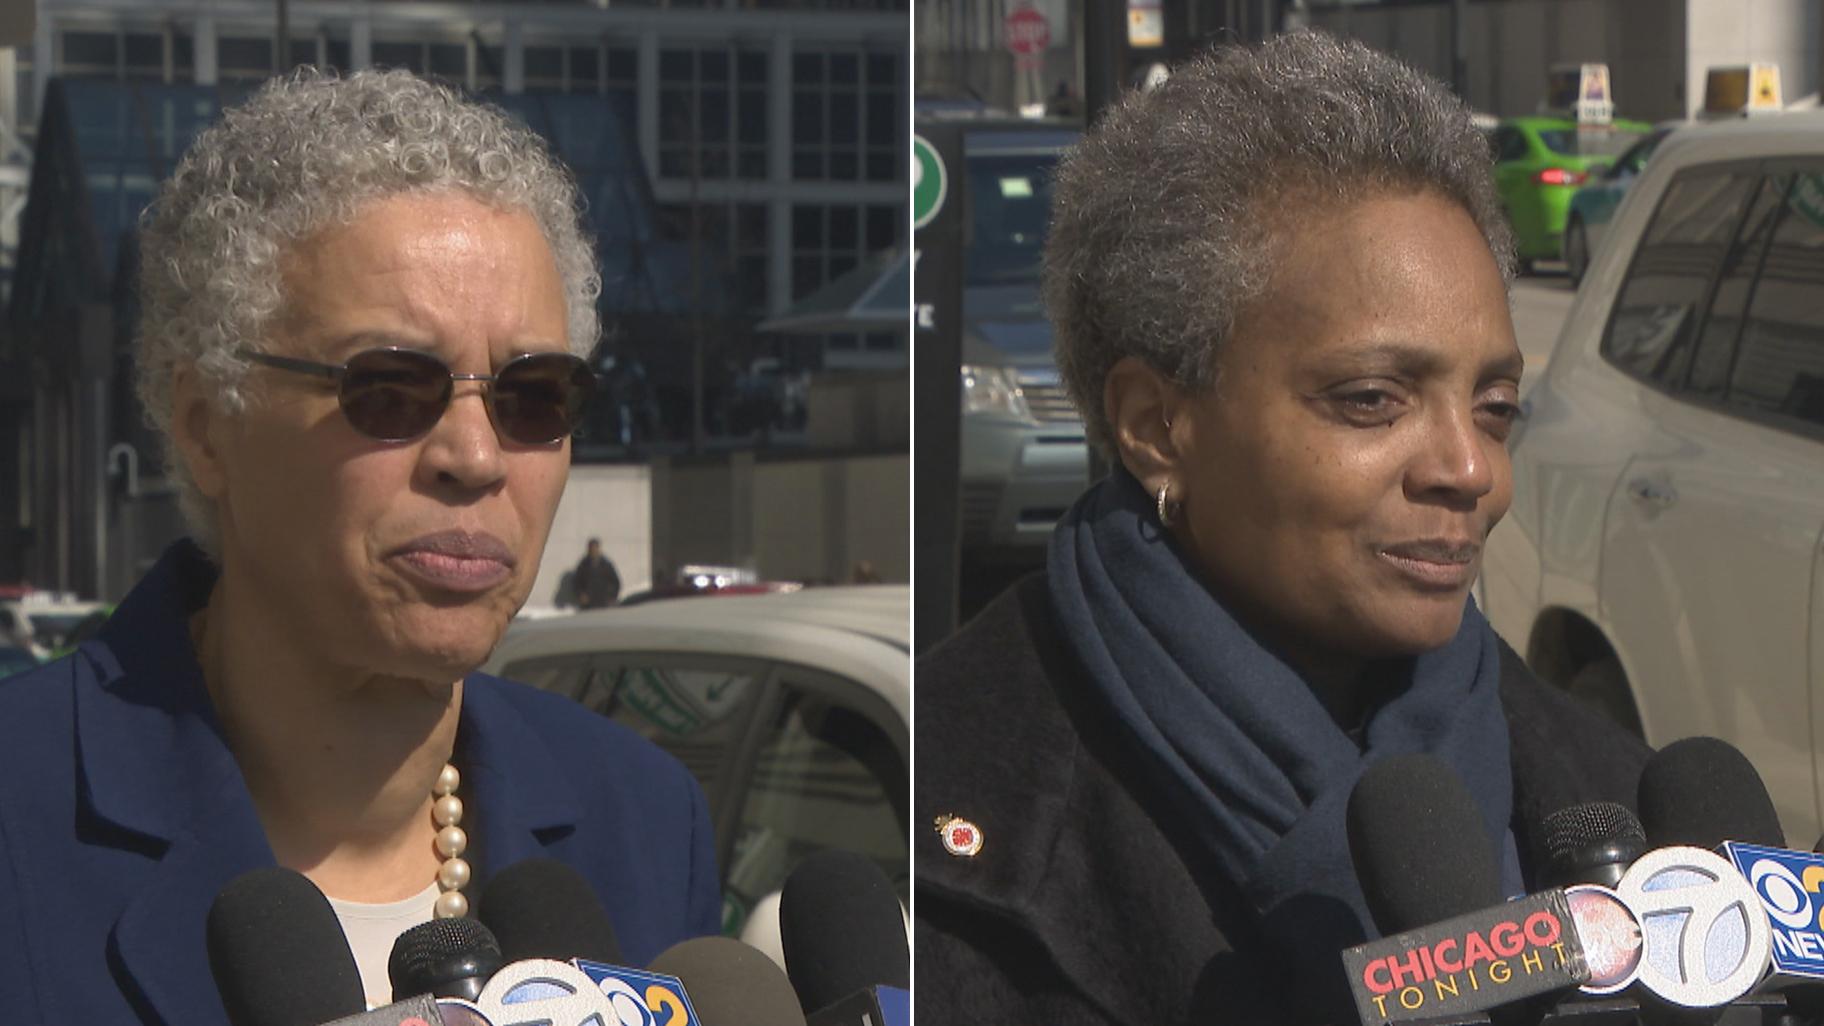 Mayoral candidates Toni Preckwinkle, left, and Lori Lightfoot speak to the media following their meeting with the Chicago Tribune editorial board Tuesday, March 12, 2019. The two will face off in a runoff election on April 2.